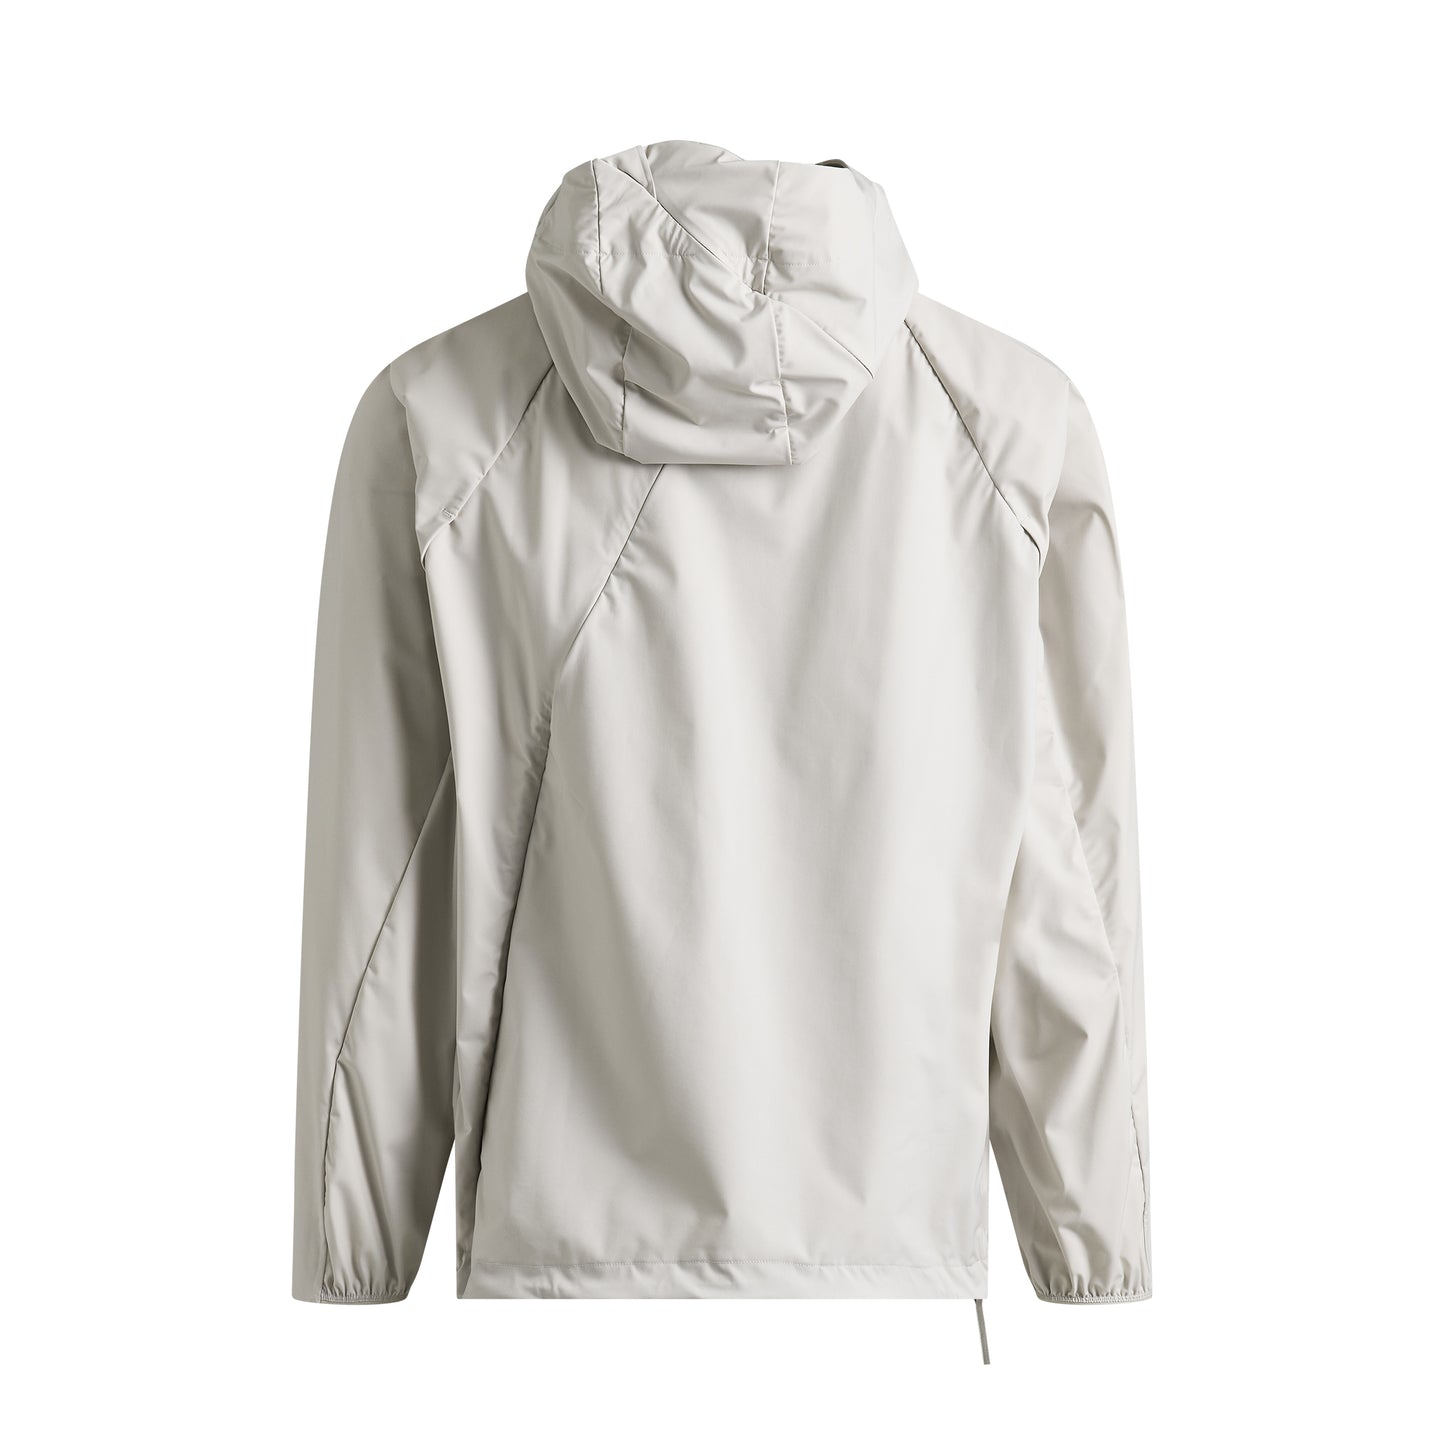 6.0 Technical Jacket (Center) in Ivory